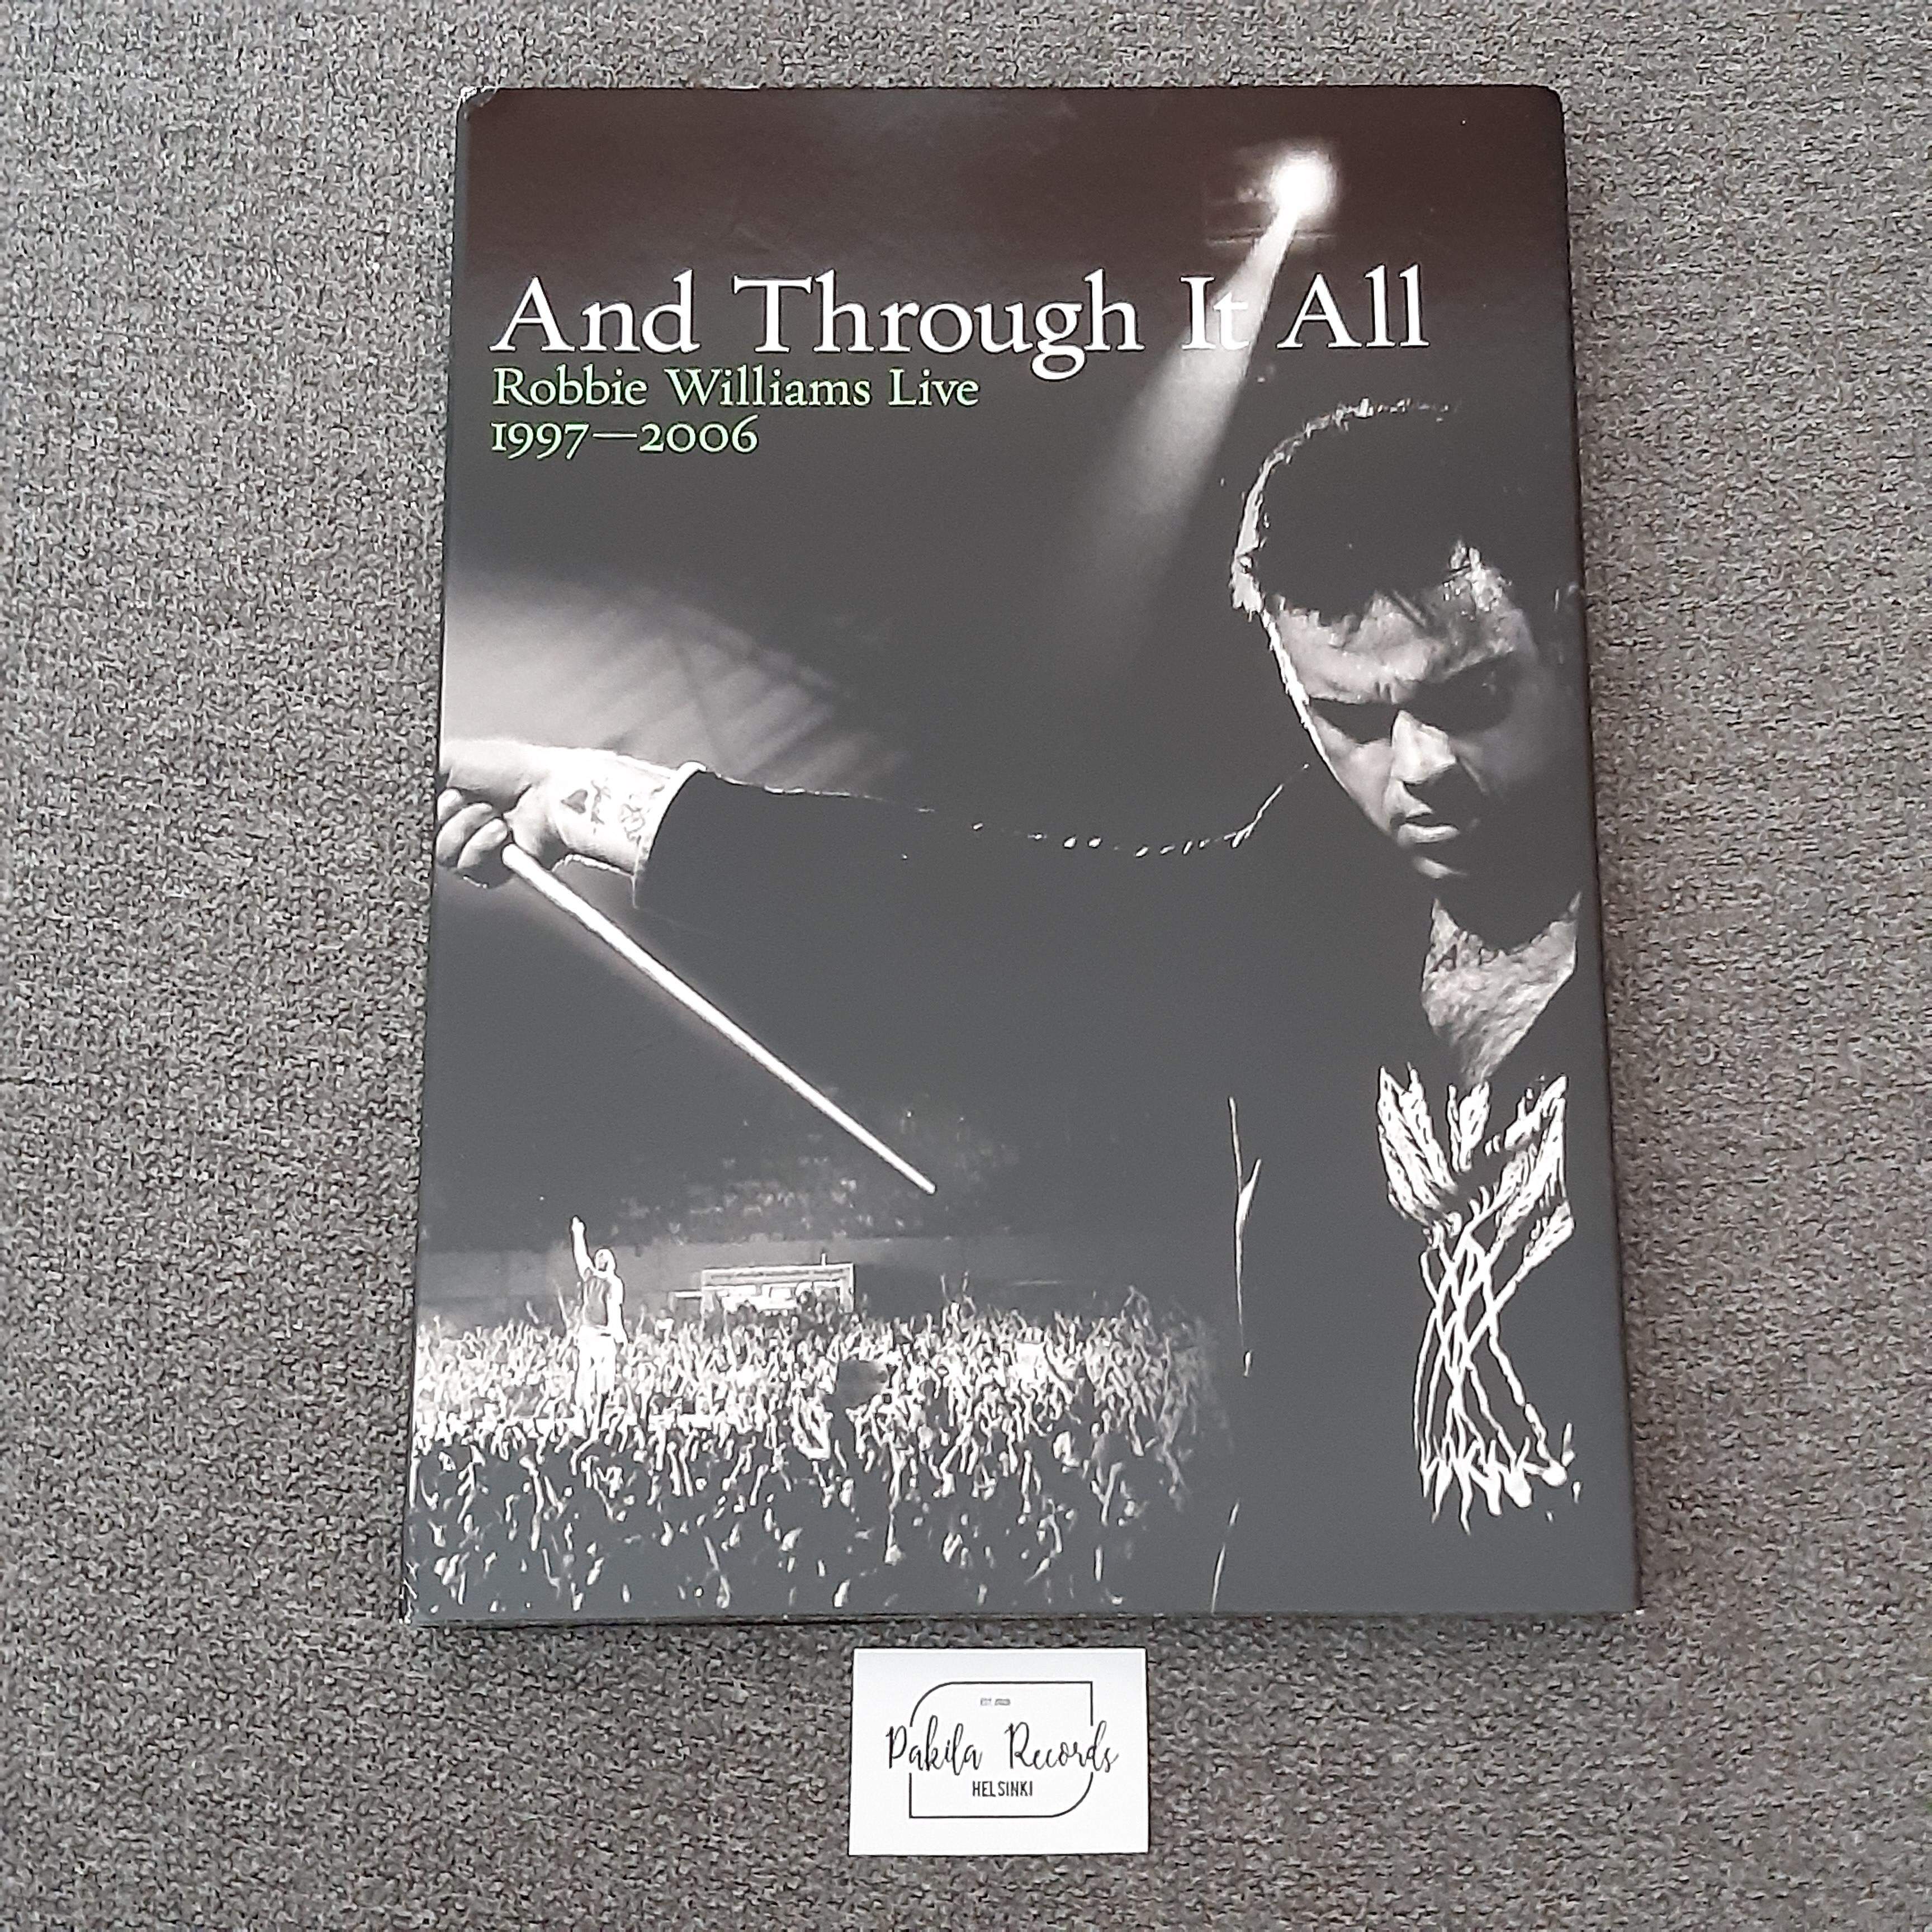 Robbie Williams - And Through It All, Live 1997-2006 - 2 DVD (käytetty)